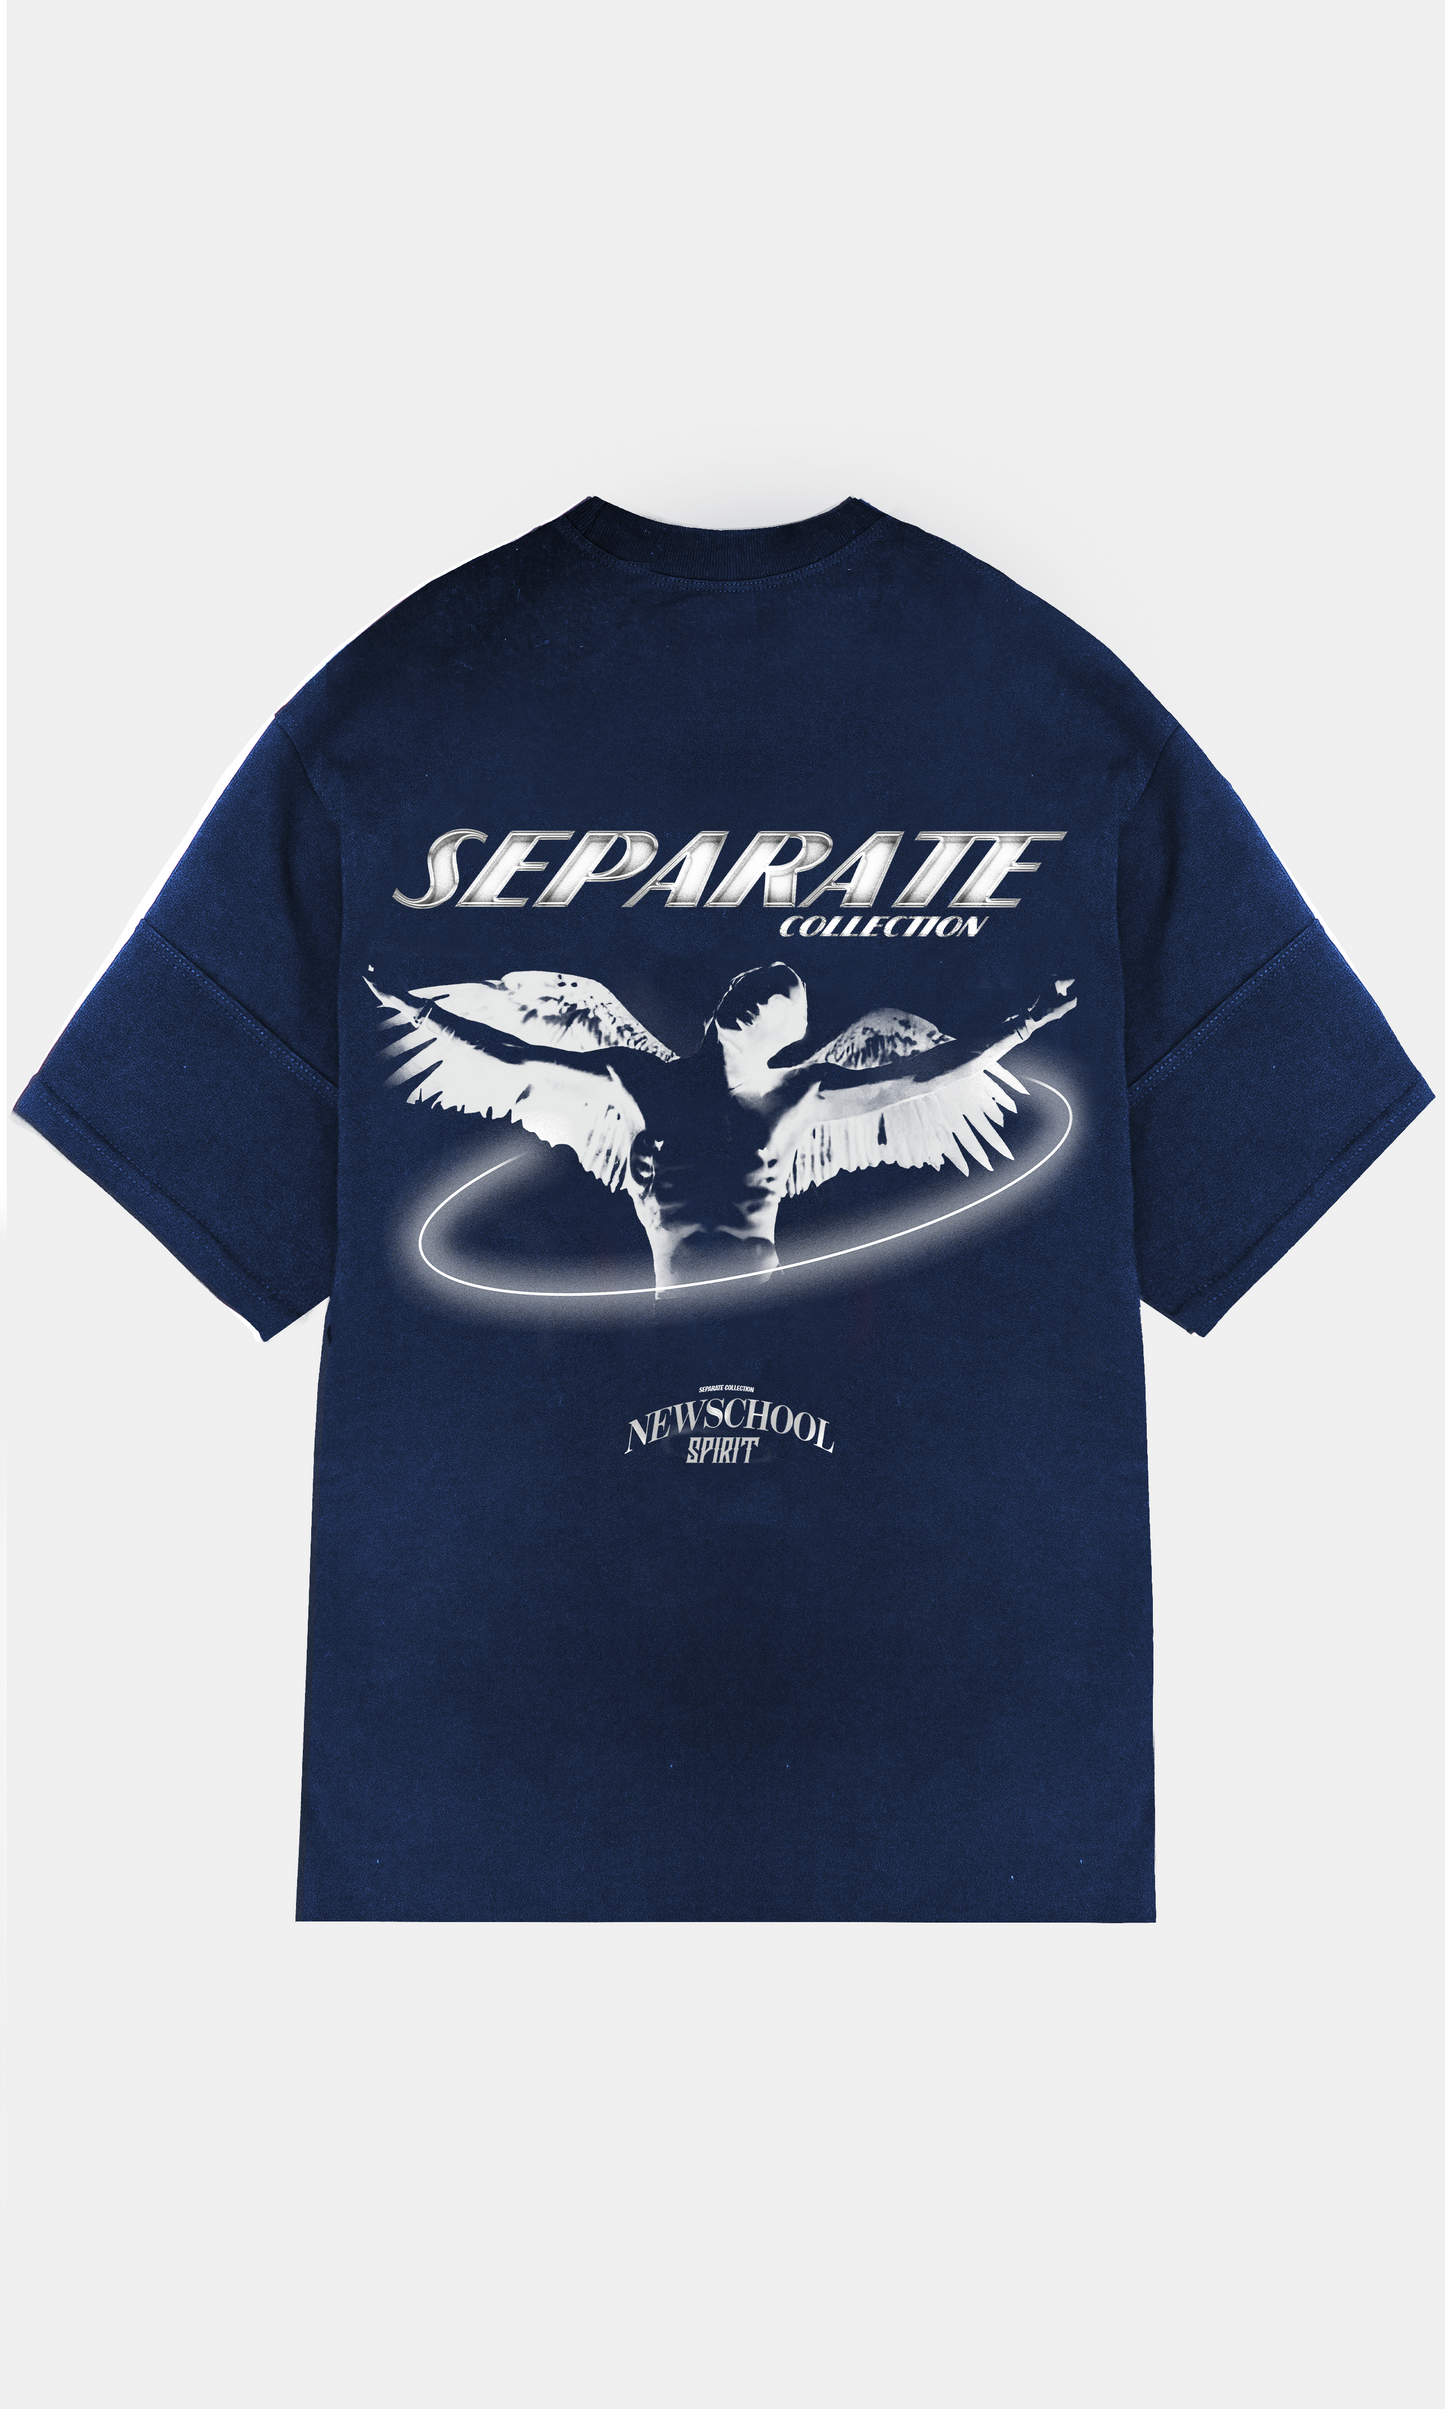 Separate Collection© New school spirit T-Shirt